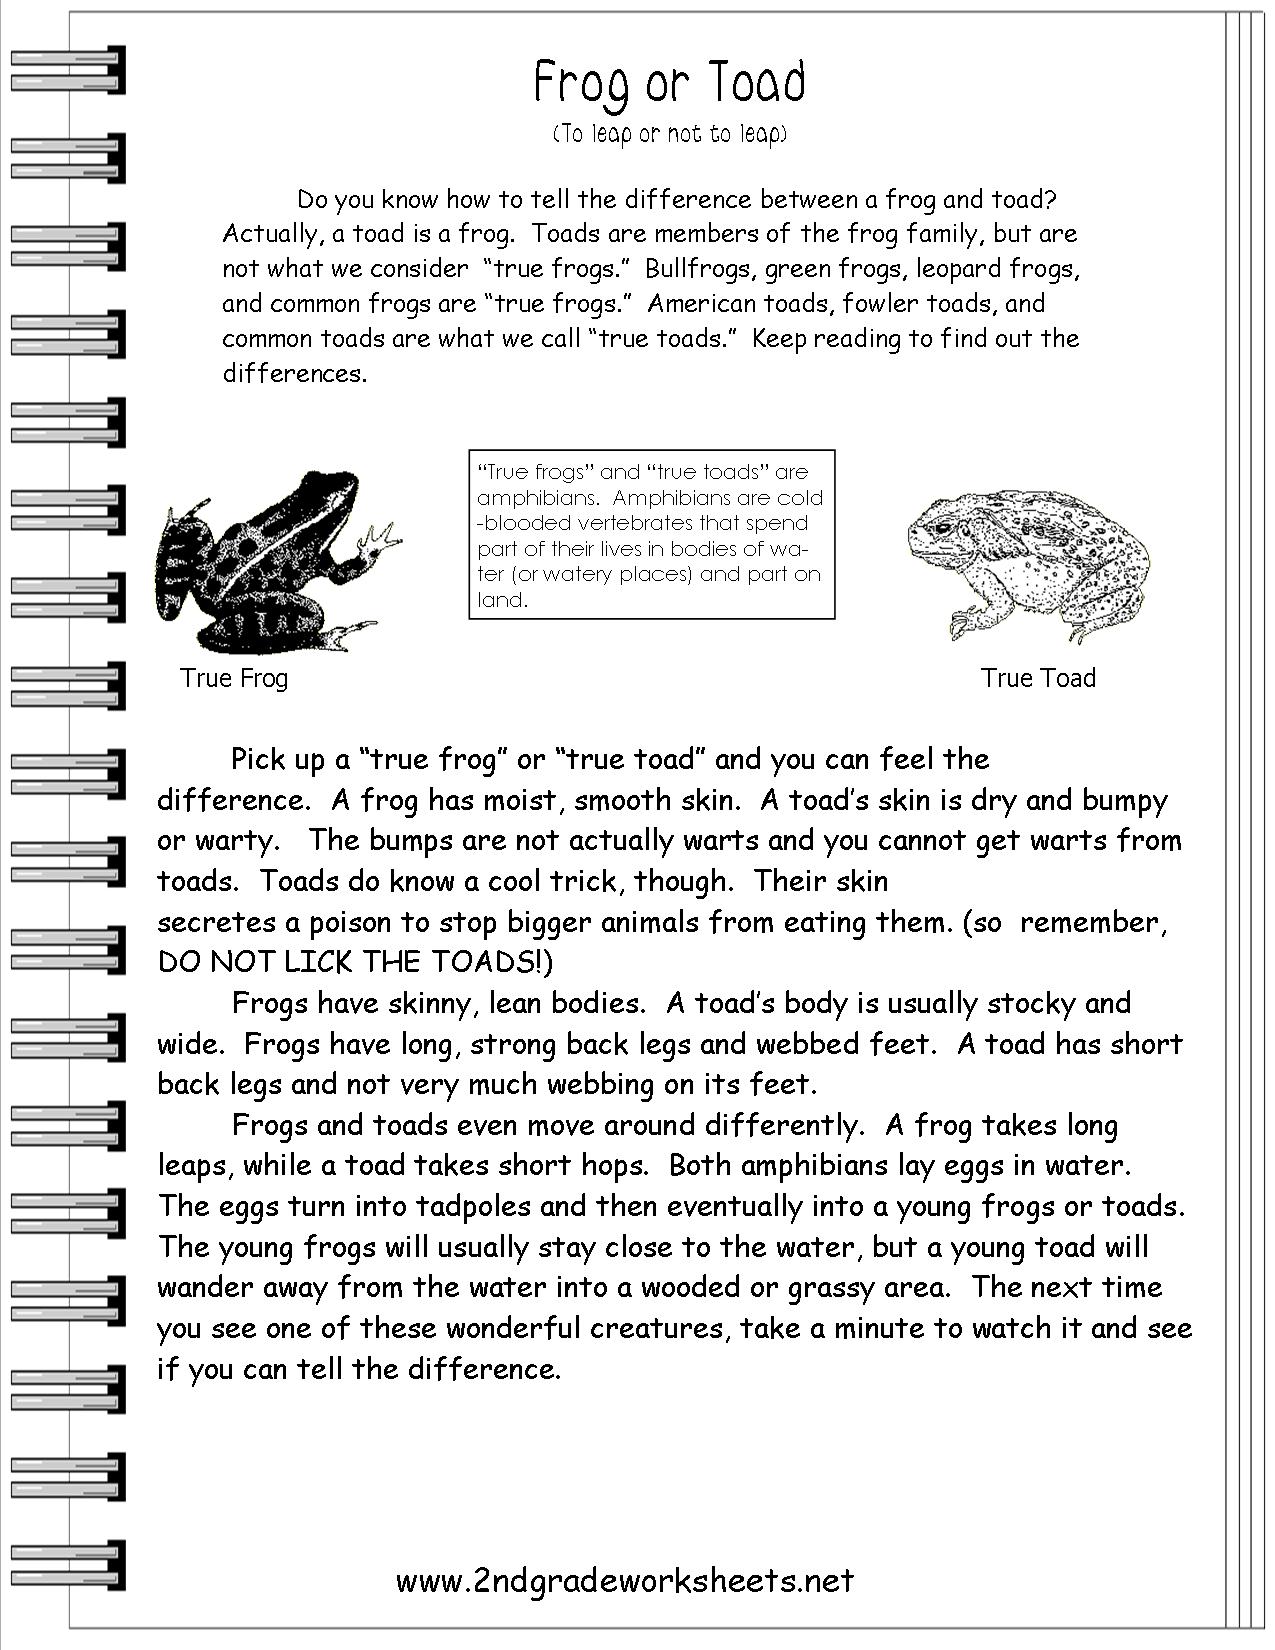 11 Best Images of Earth Day Reading Comprehension Worksheets - Reduce